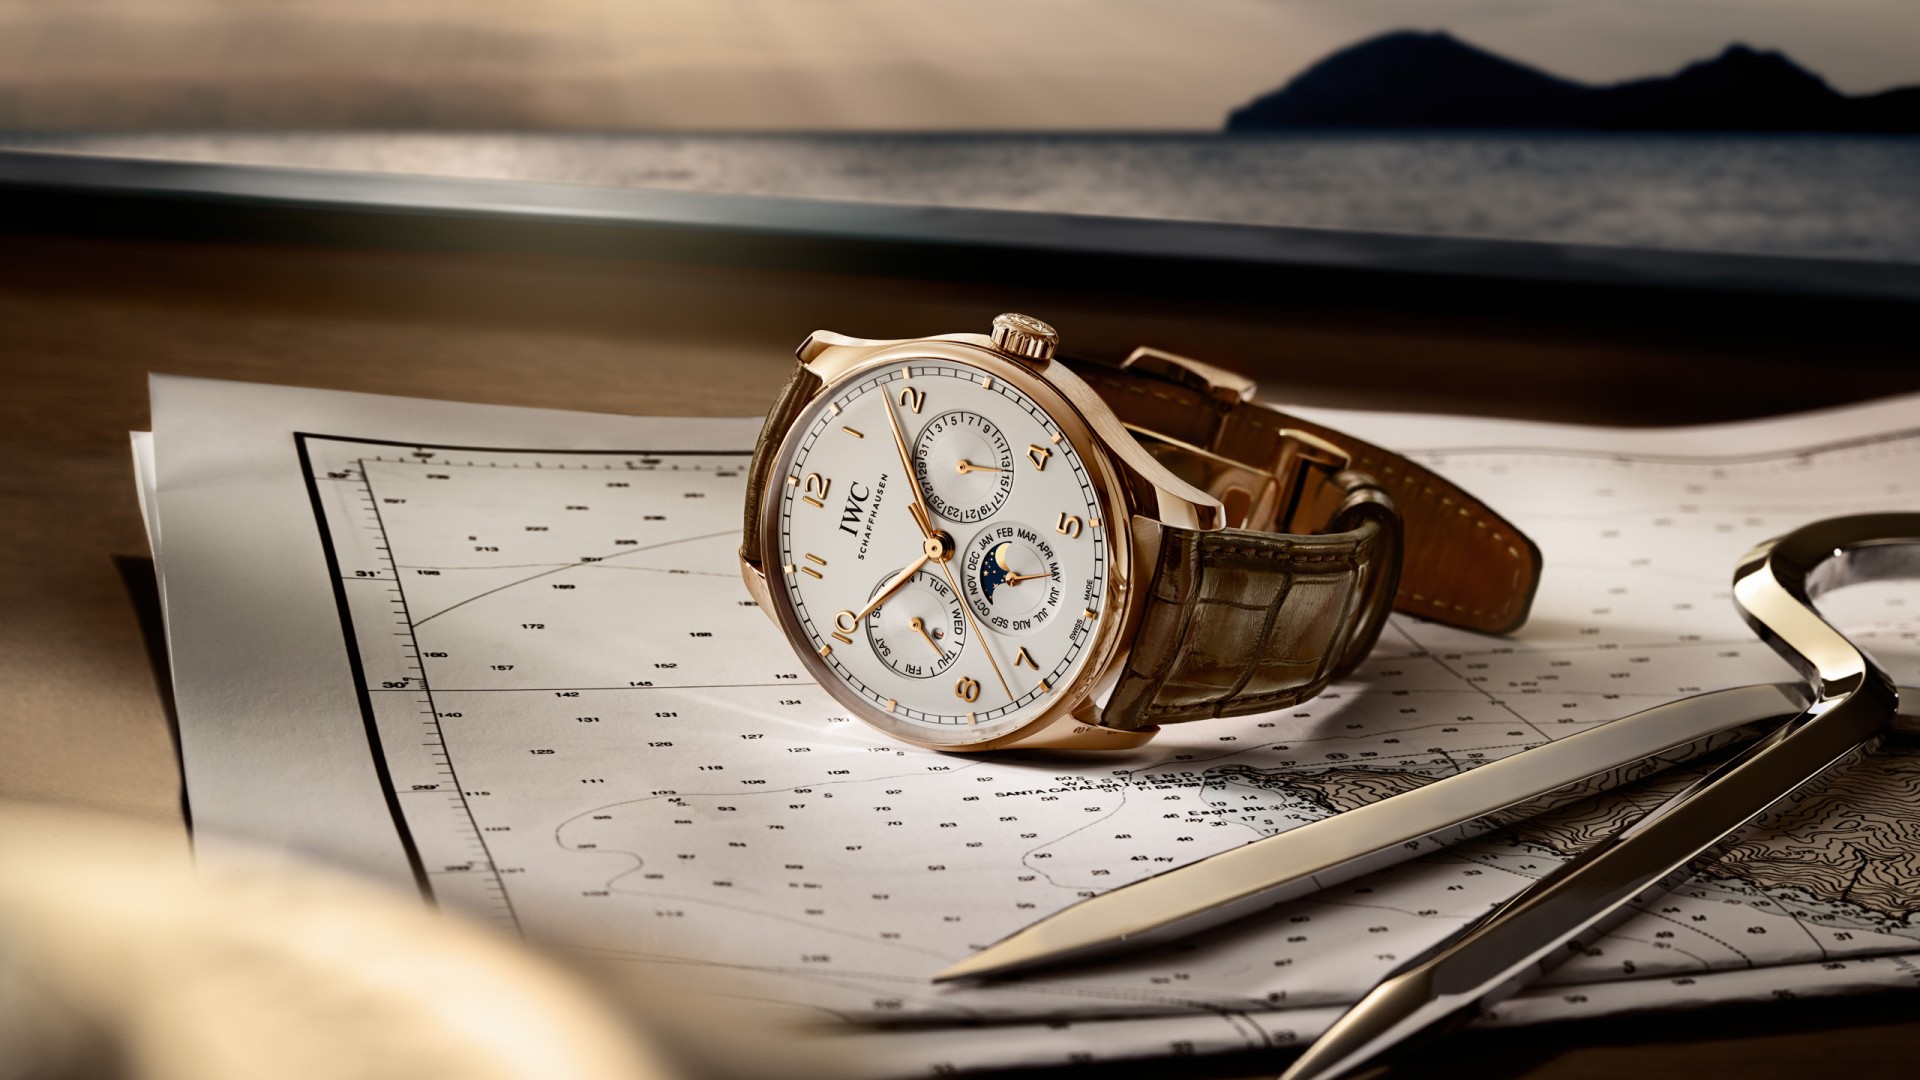 New: IWC Portugieser Novelties for 2020 with Editorial commentary -